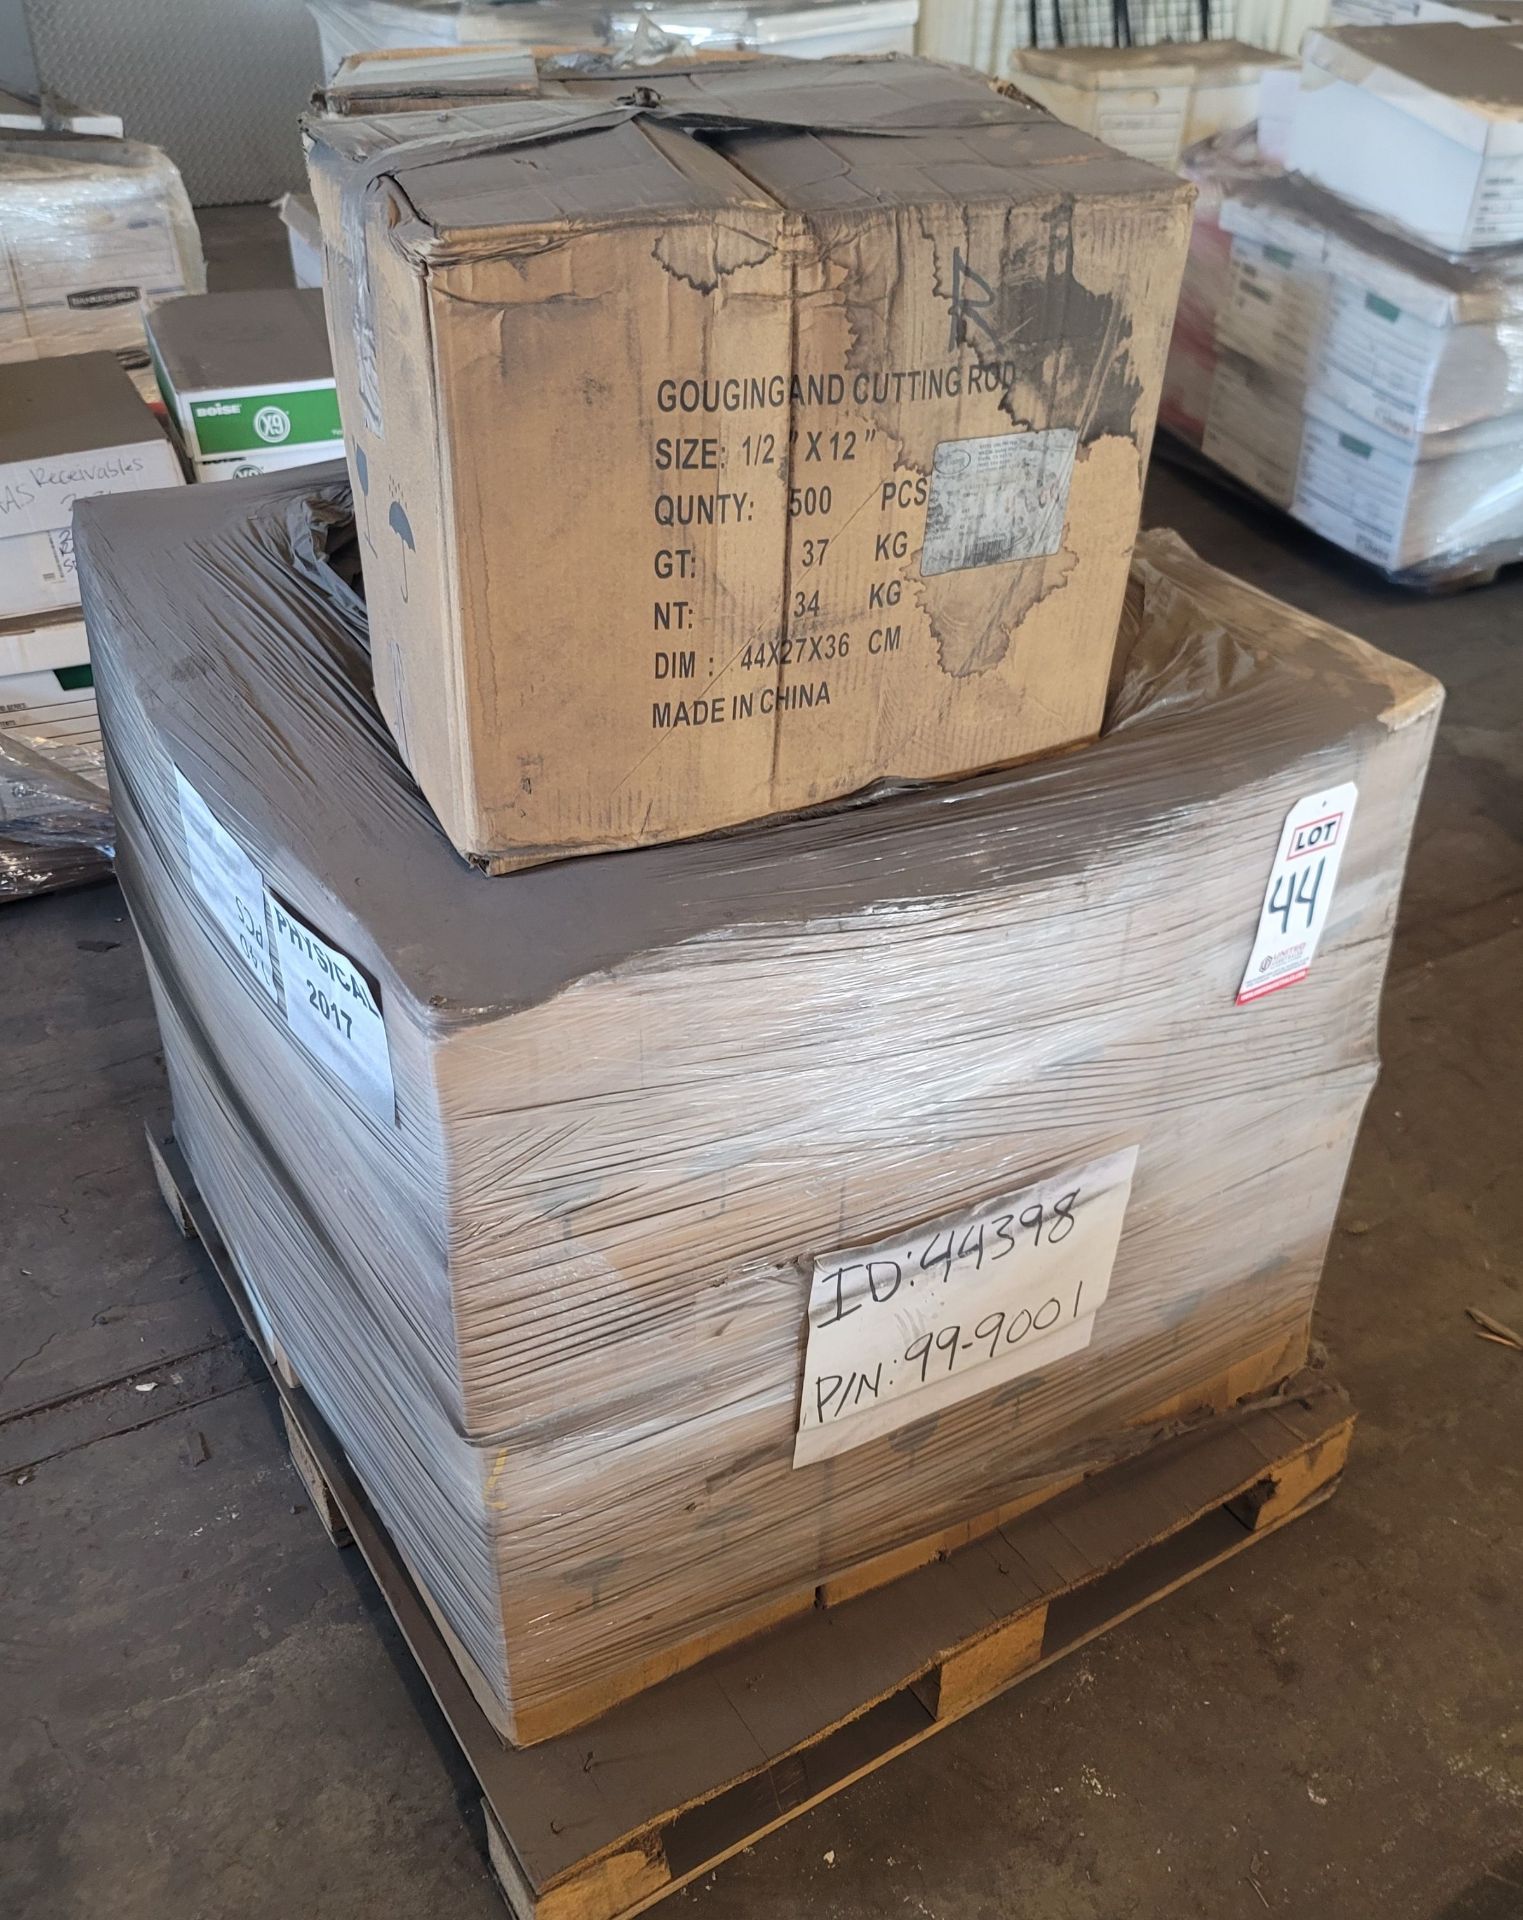 LOT - PALLET OF 1/2" X 12" GOUGING AND CUTTING ROD